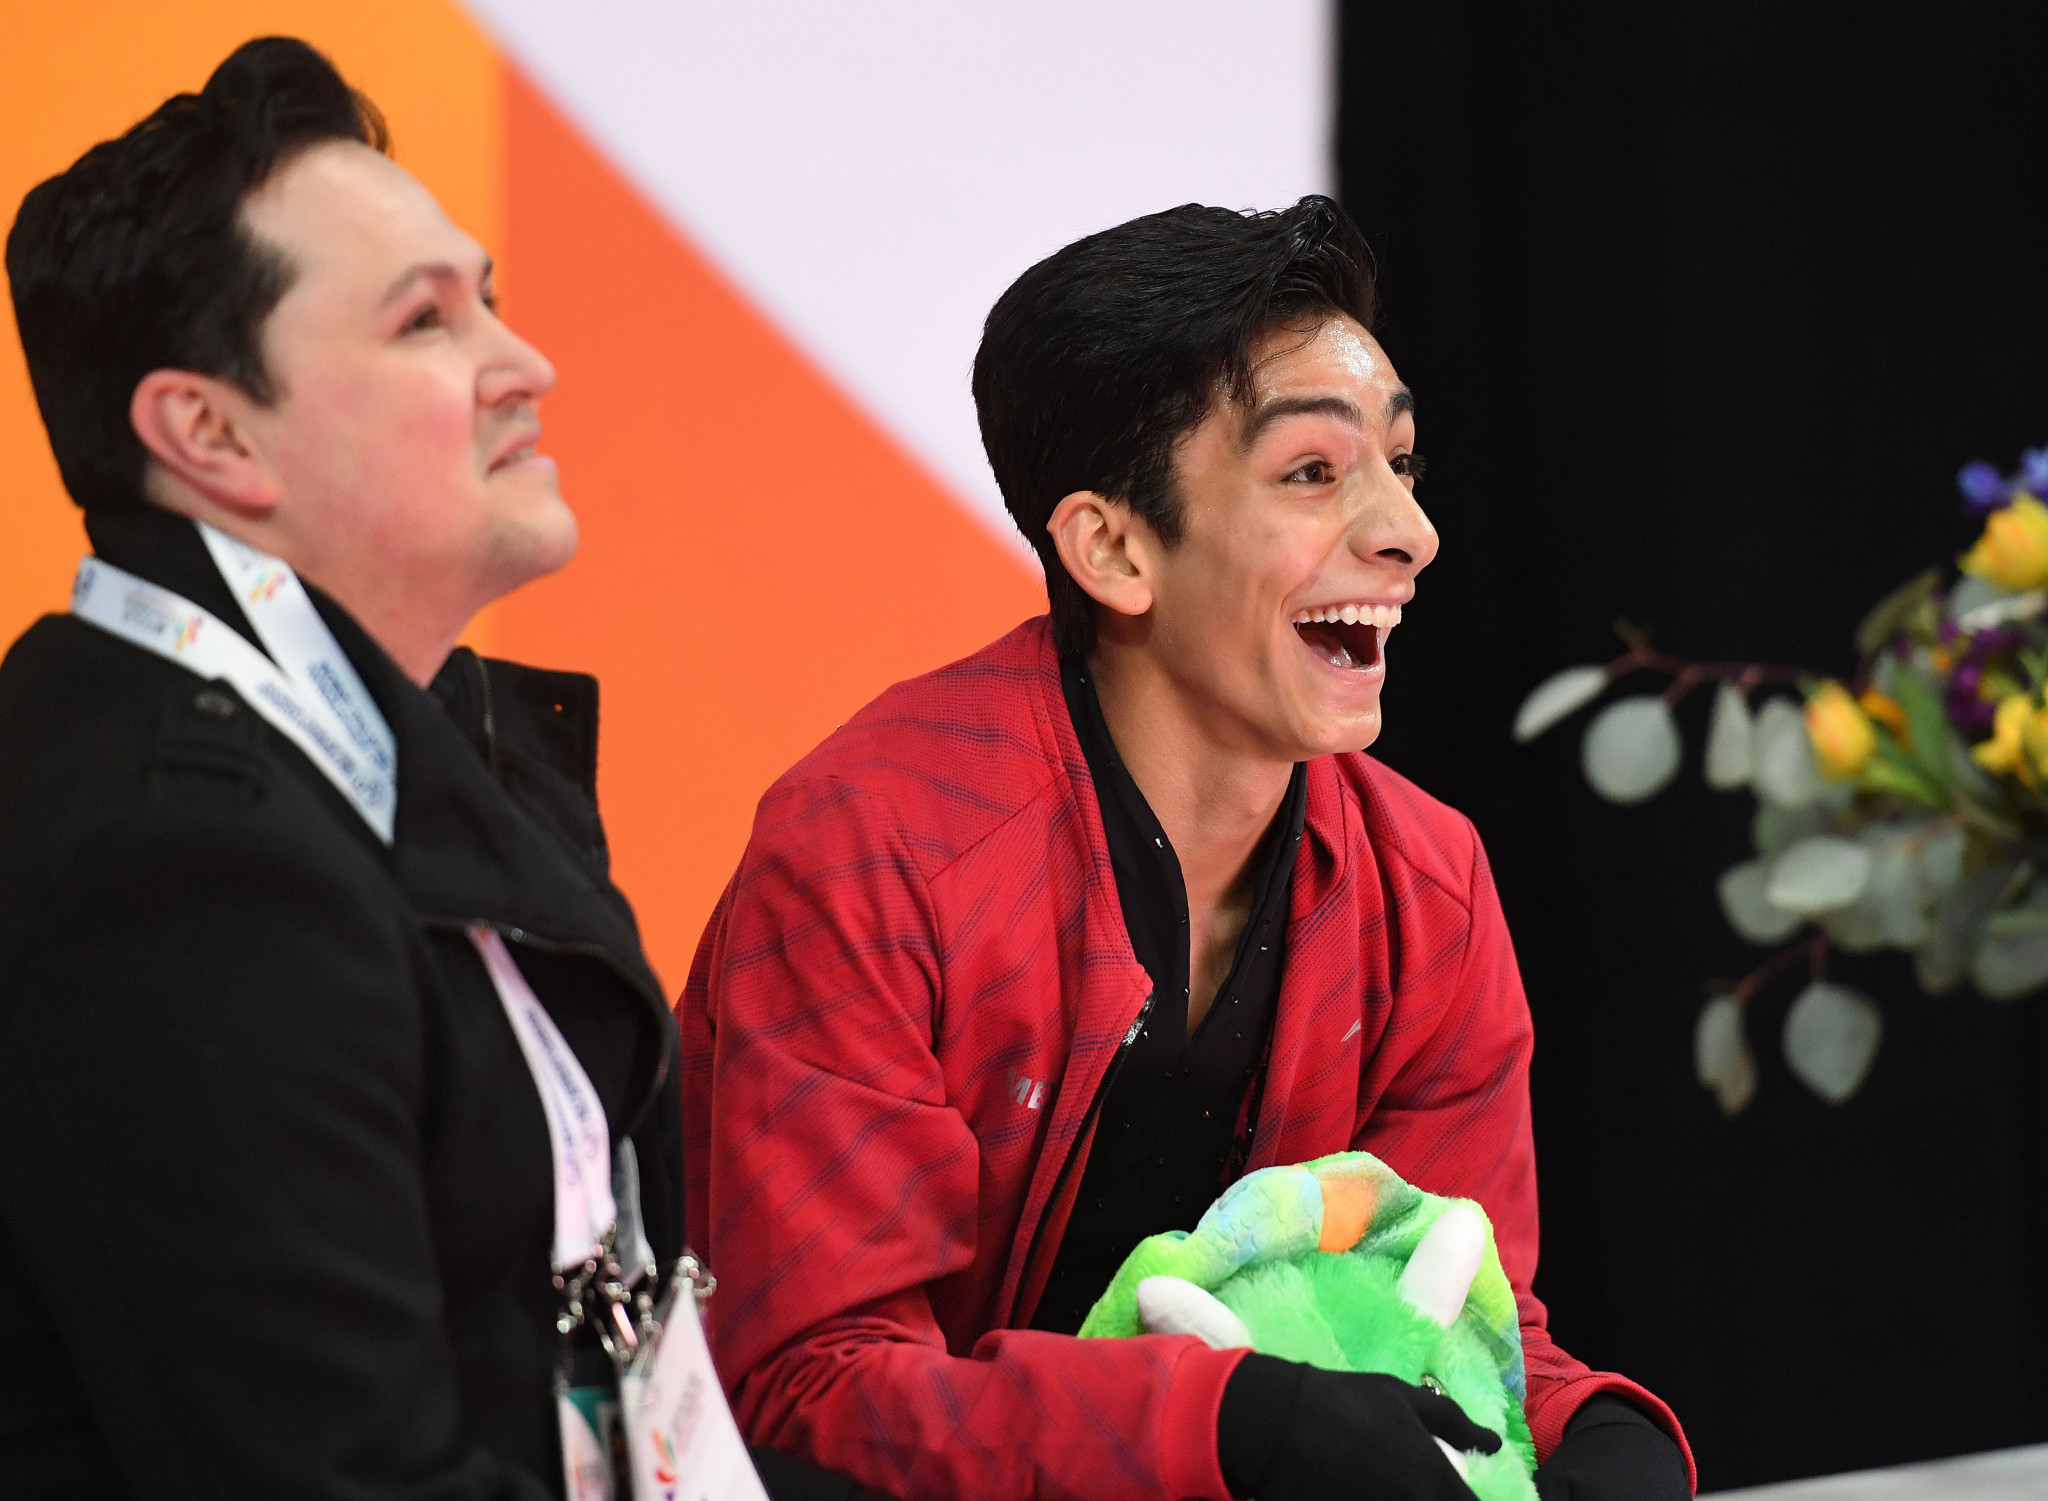 Donovan Carrillo finished 22nd at the 2018 World Figure Skating Championships ©Getty Images